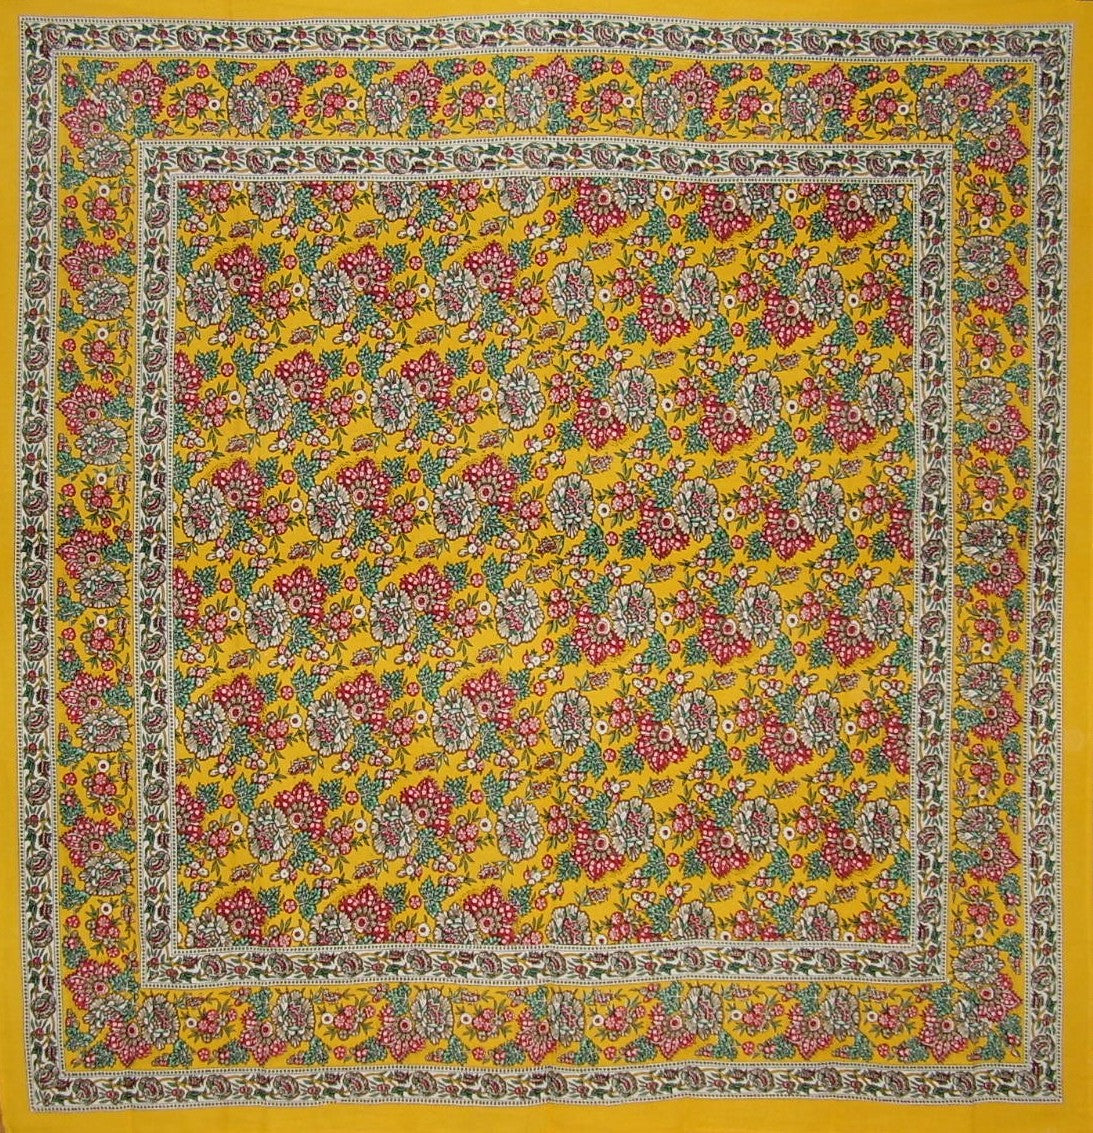 Floral Print Square Cotton Tablecloth 70" x 70" Honey Yellow